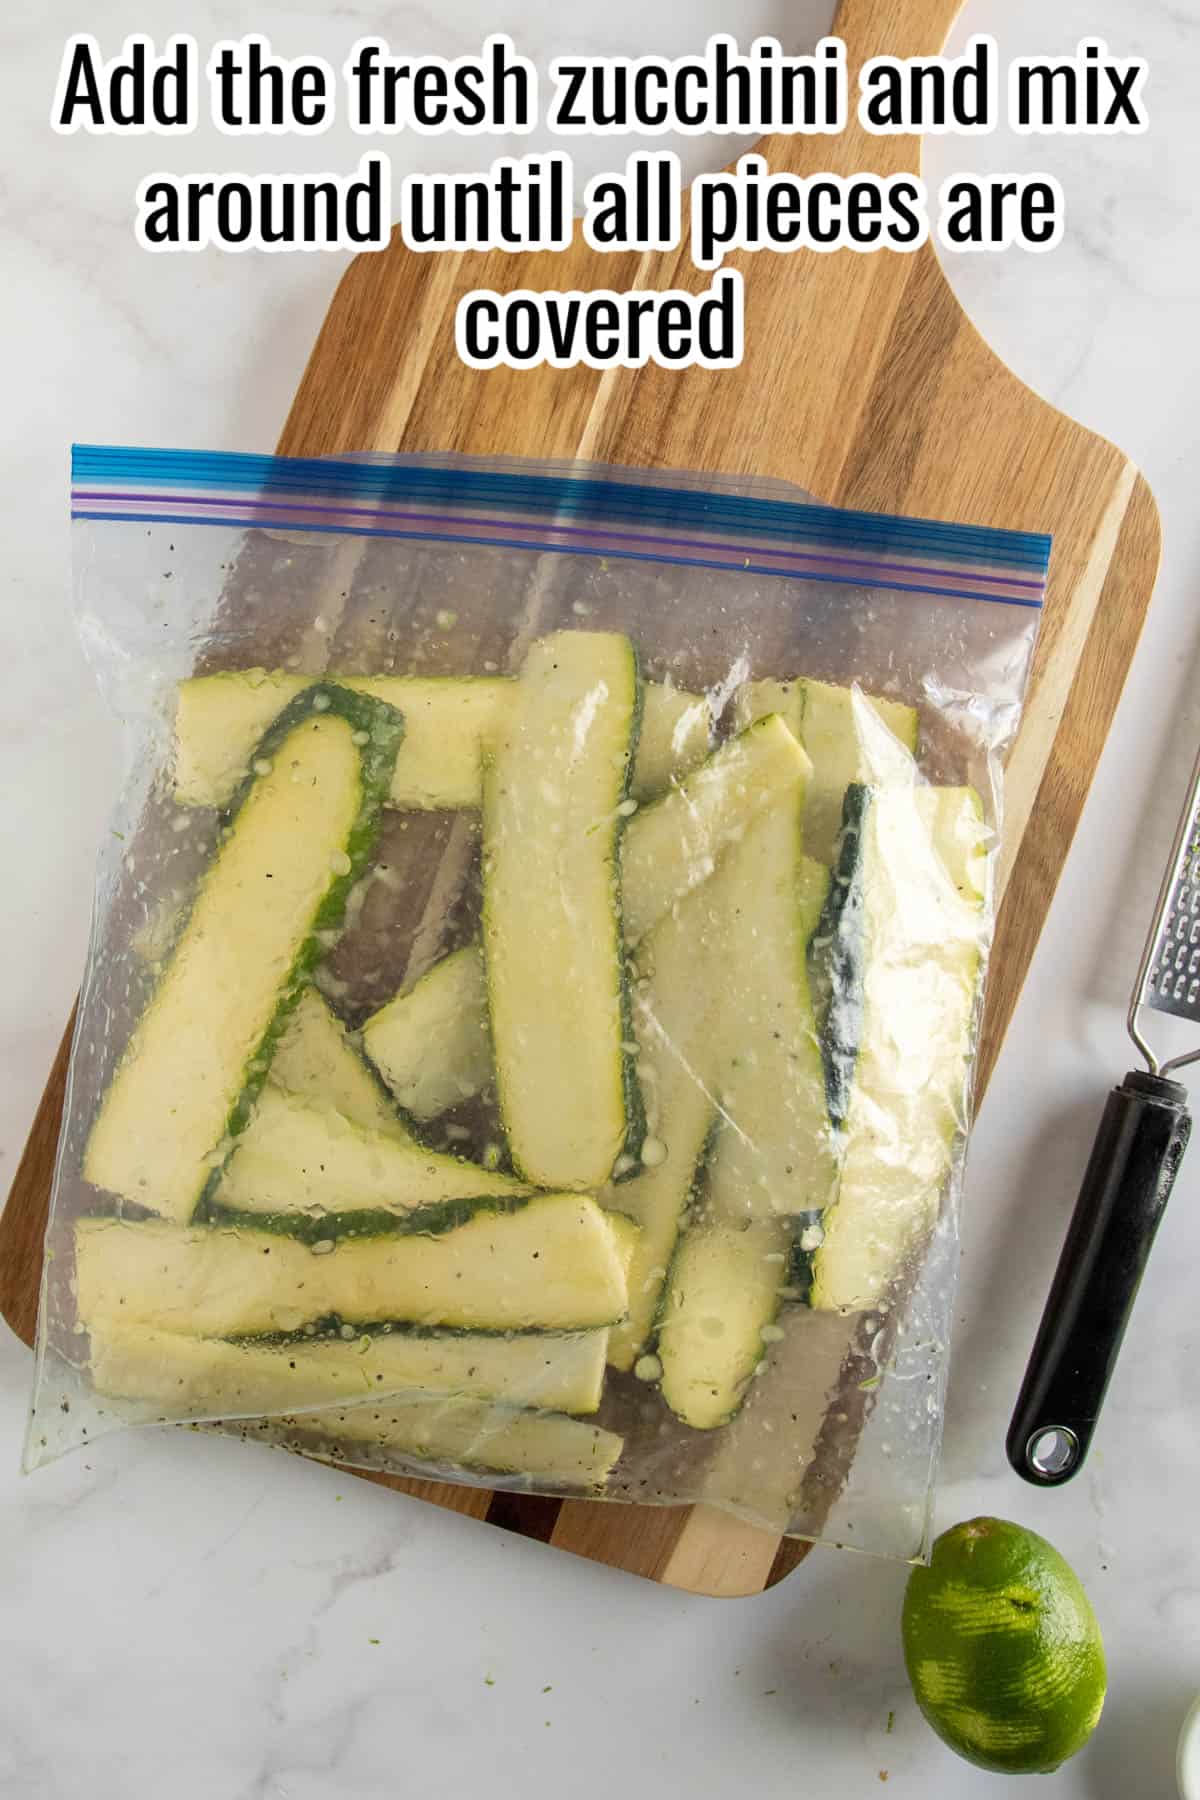 Zucchini slices in a freezer bag, marinating.